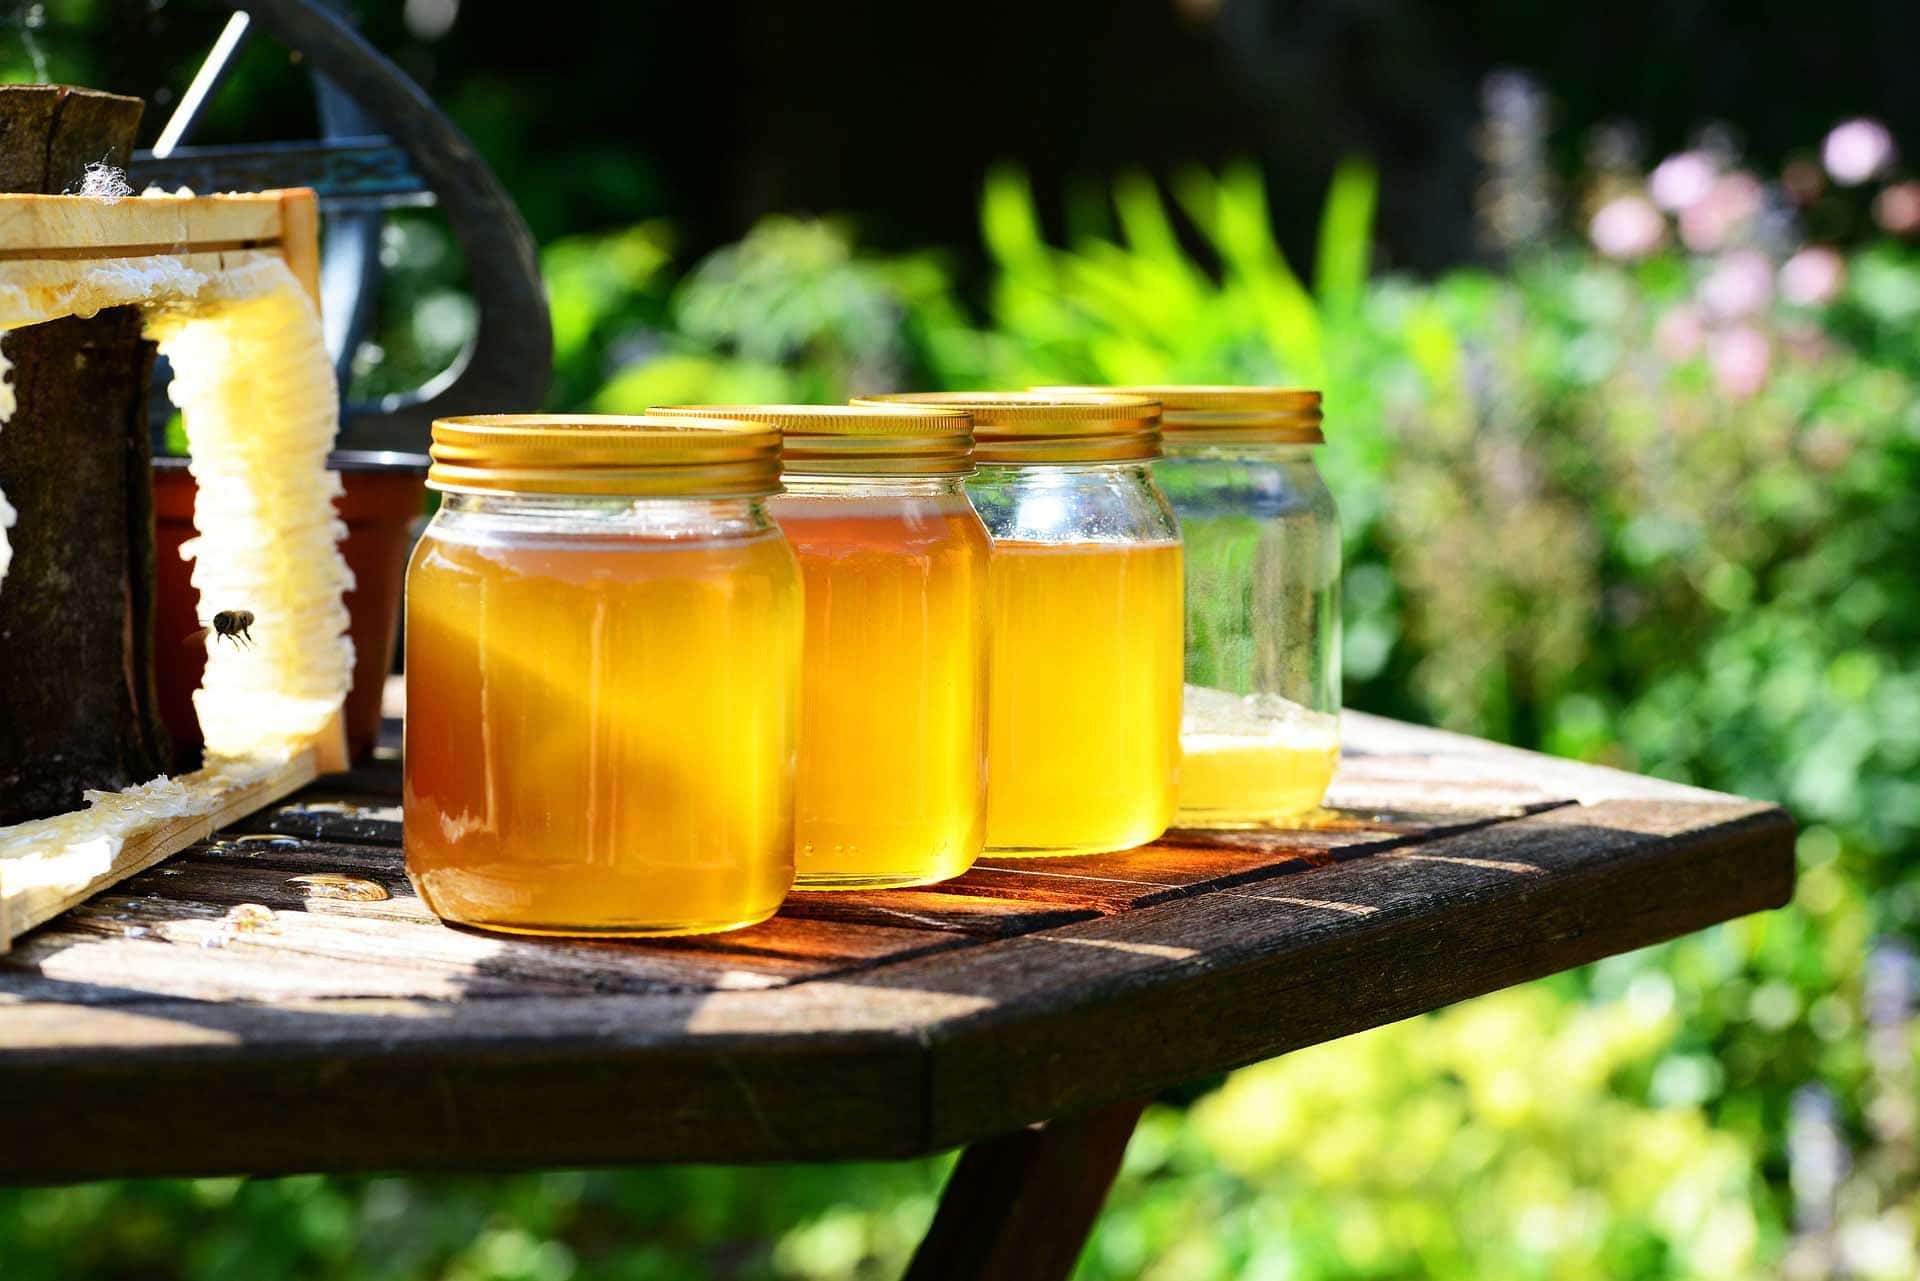 A picture of an outdoor picnic table on a sunny day with four jars of honey on it.